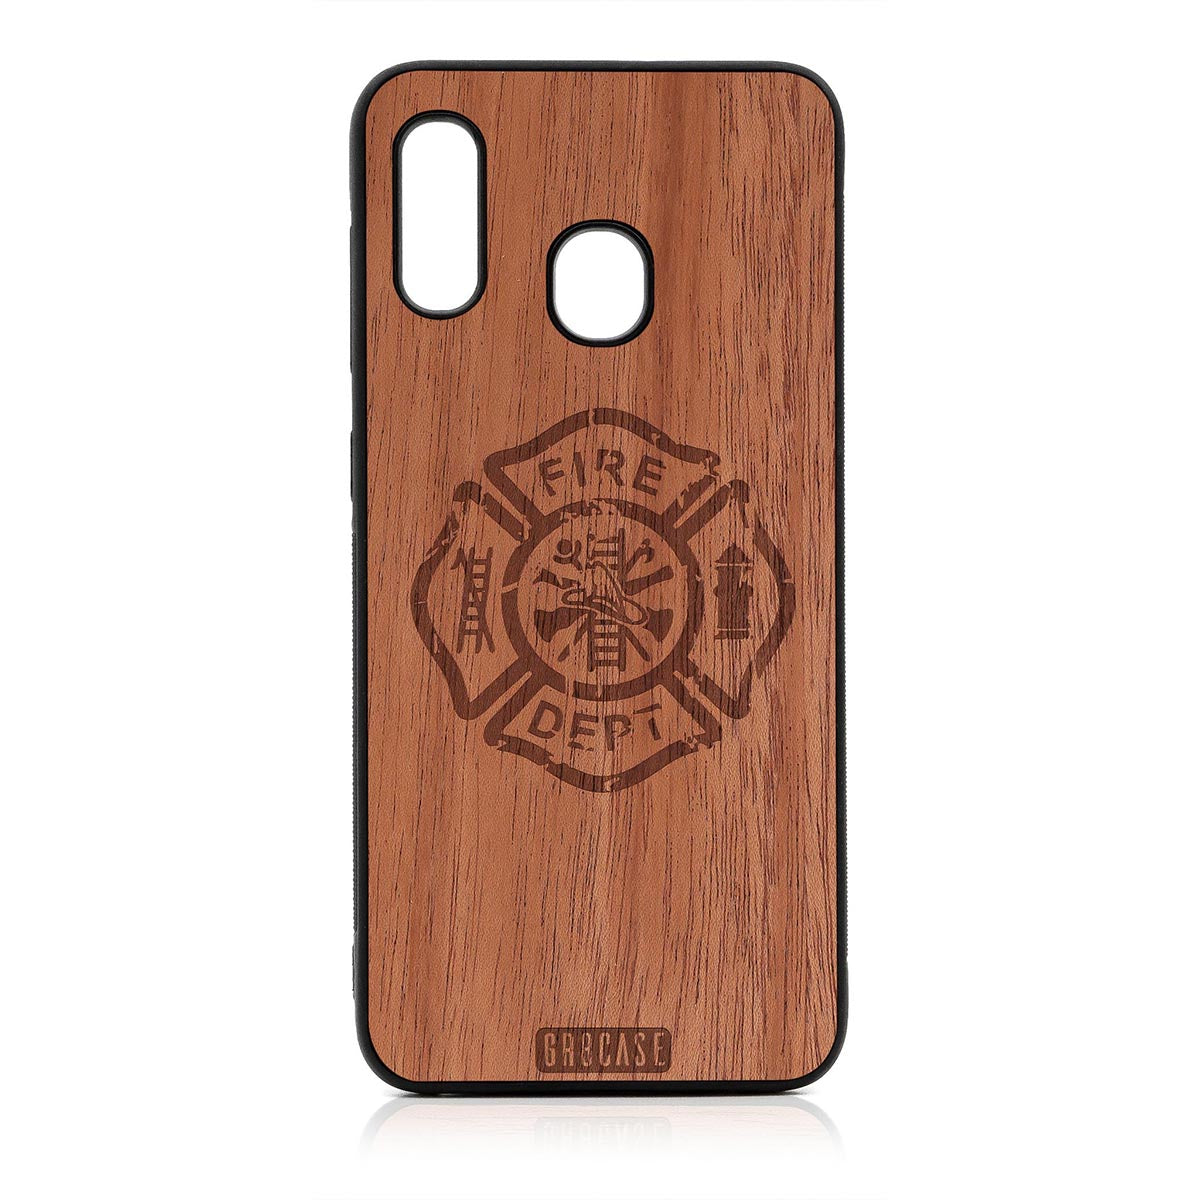 Fire Department Design Wood Case For Samsung Galaxy A20 by GR8CASE